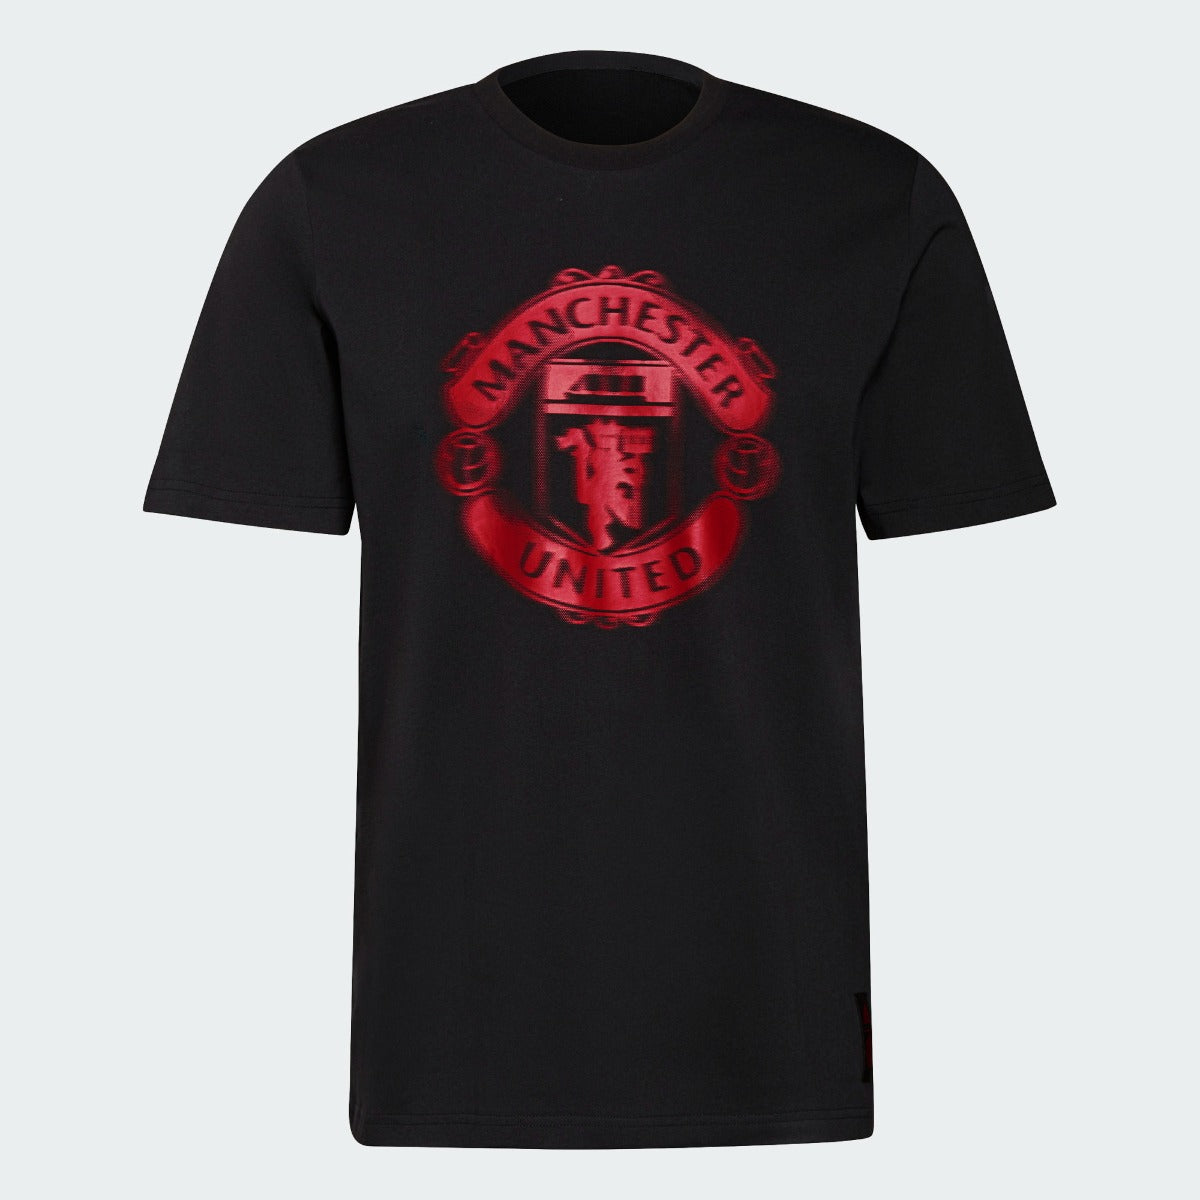 Adidas 2021-22 Manchester United Tee - Black-Red